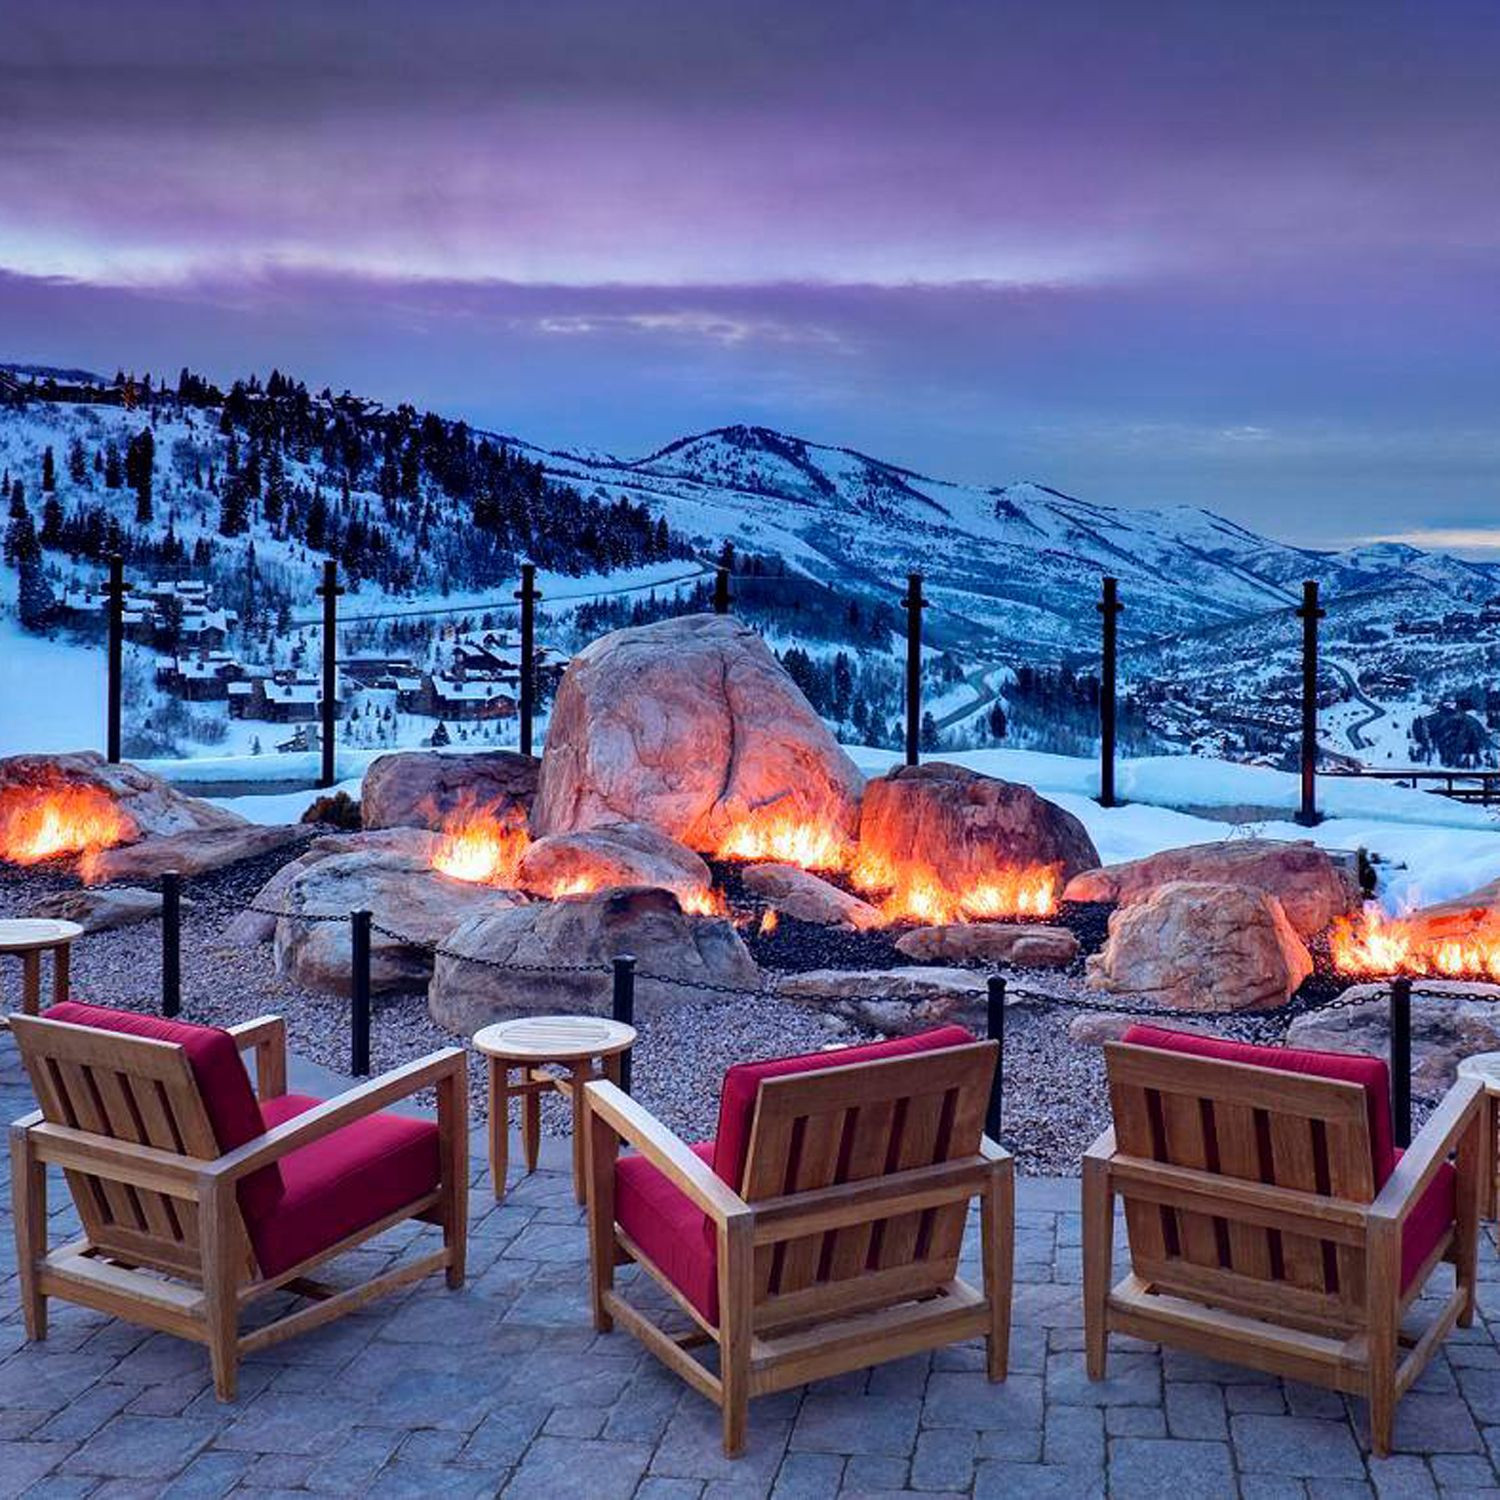 Winter Getaways Ideas
 The 8 Most Luxurious Mountain Resorts in America